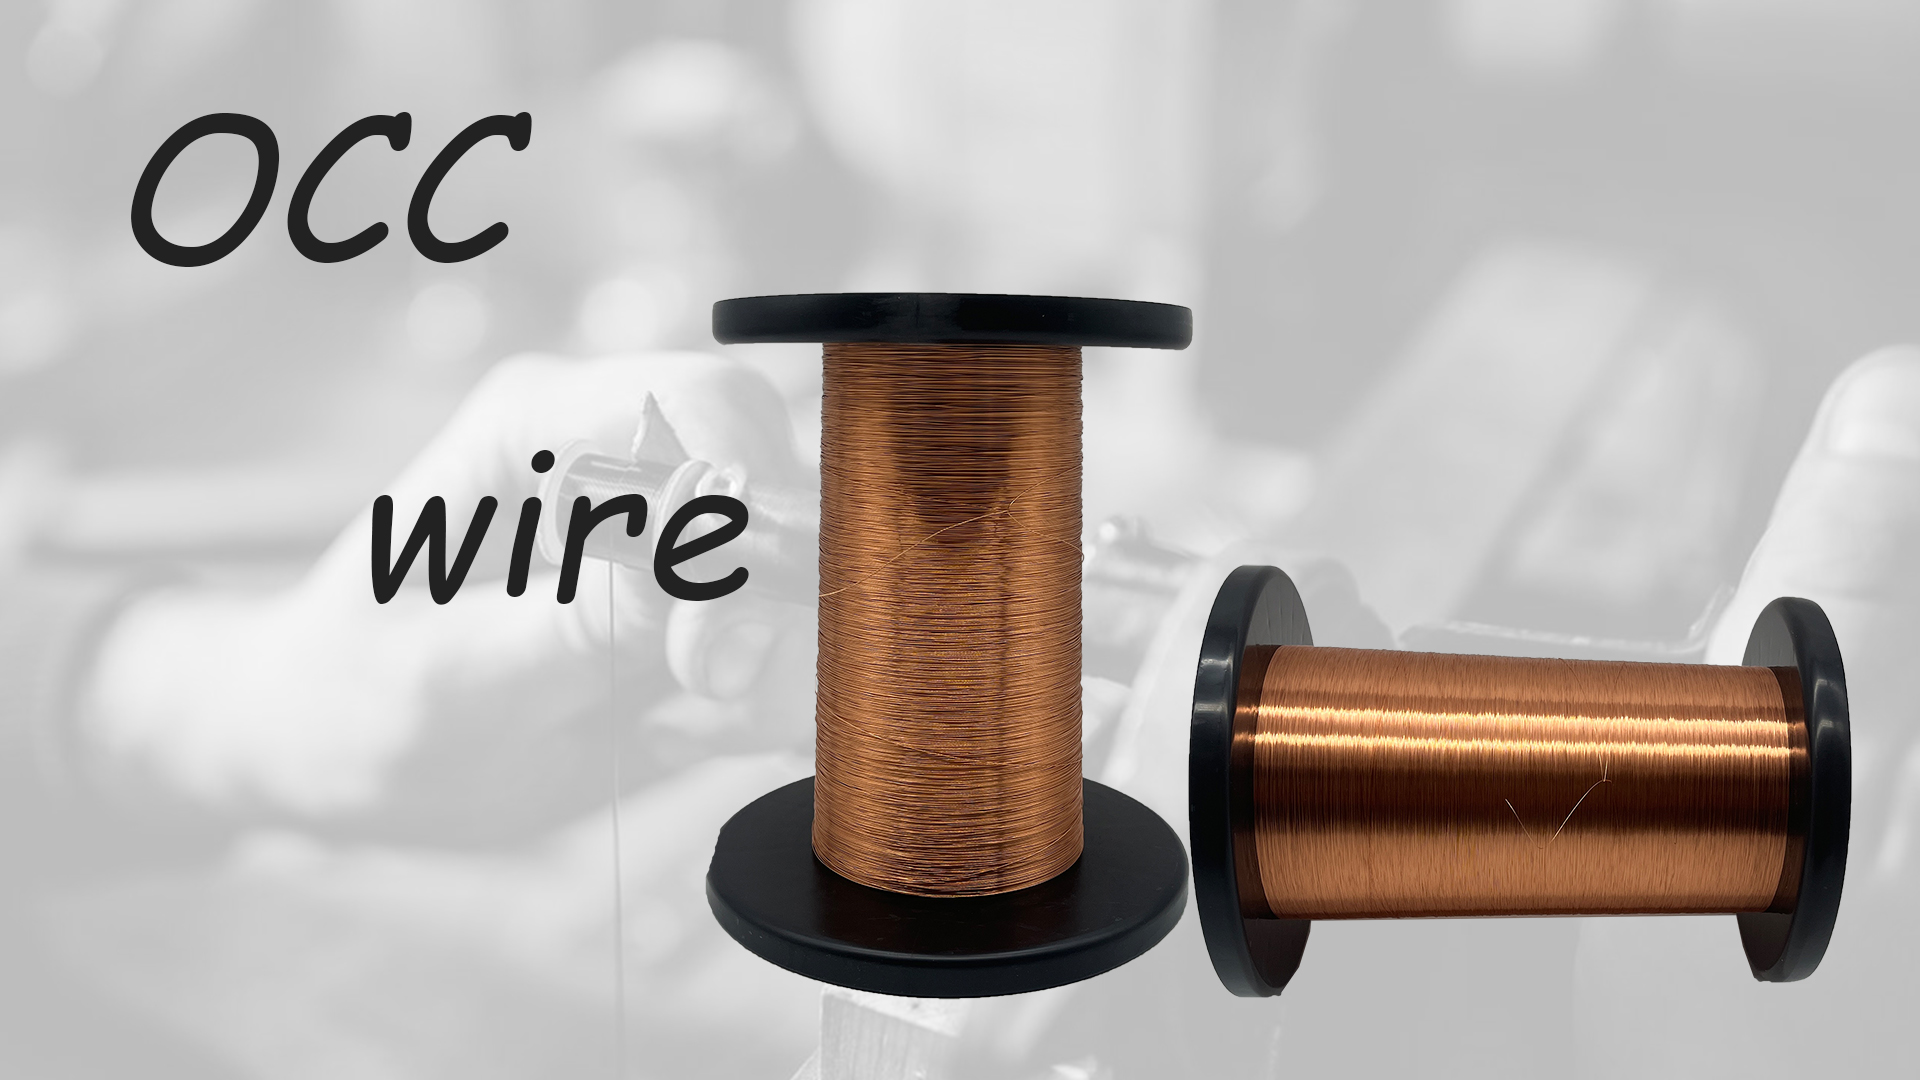 Breaking news! OCC enameled and bare wire can be made here!